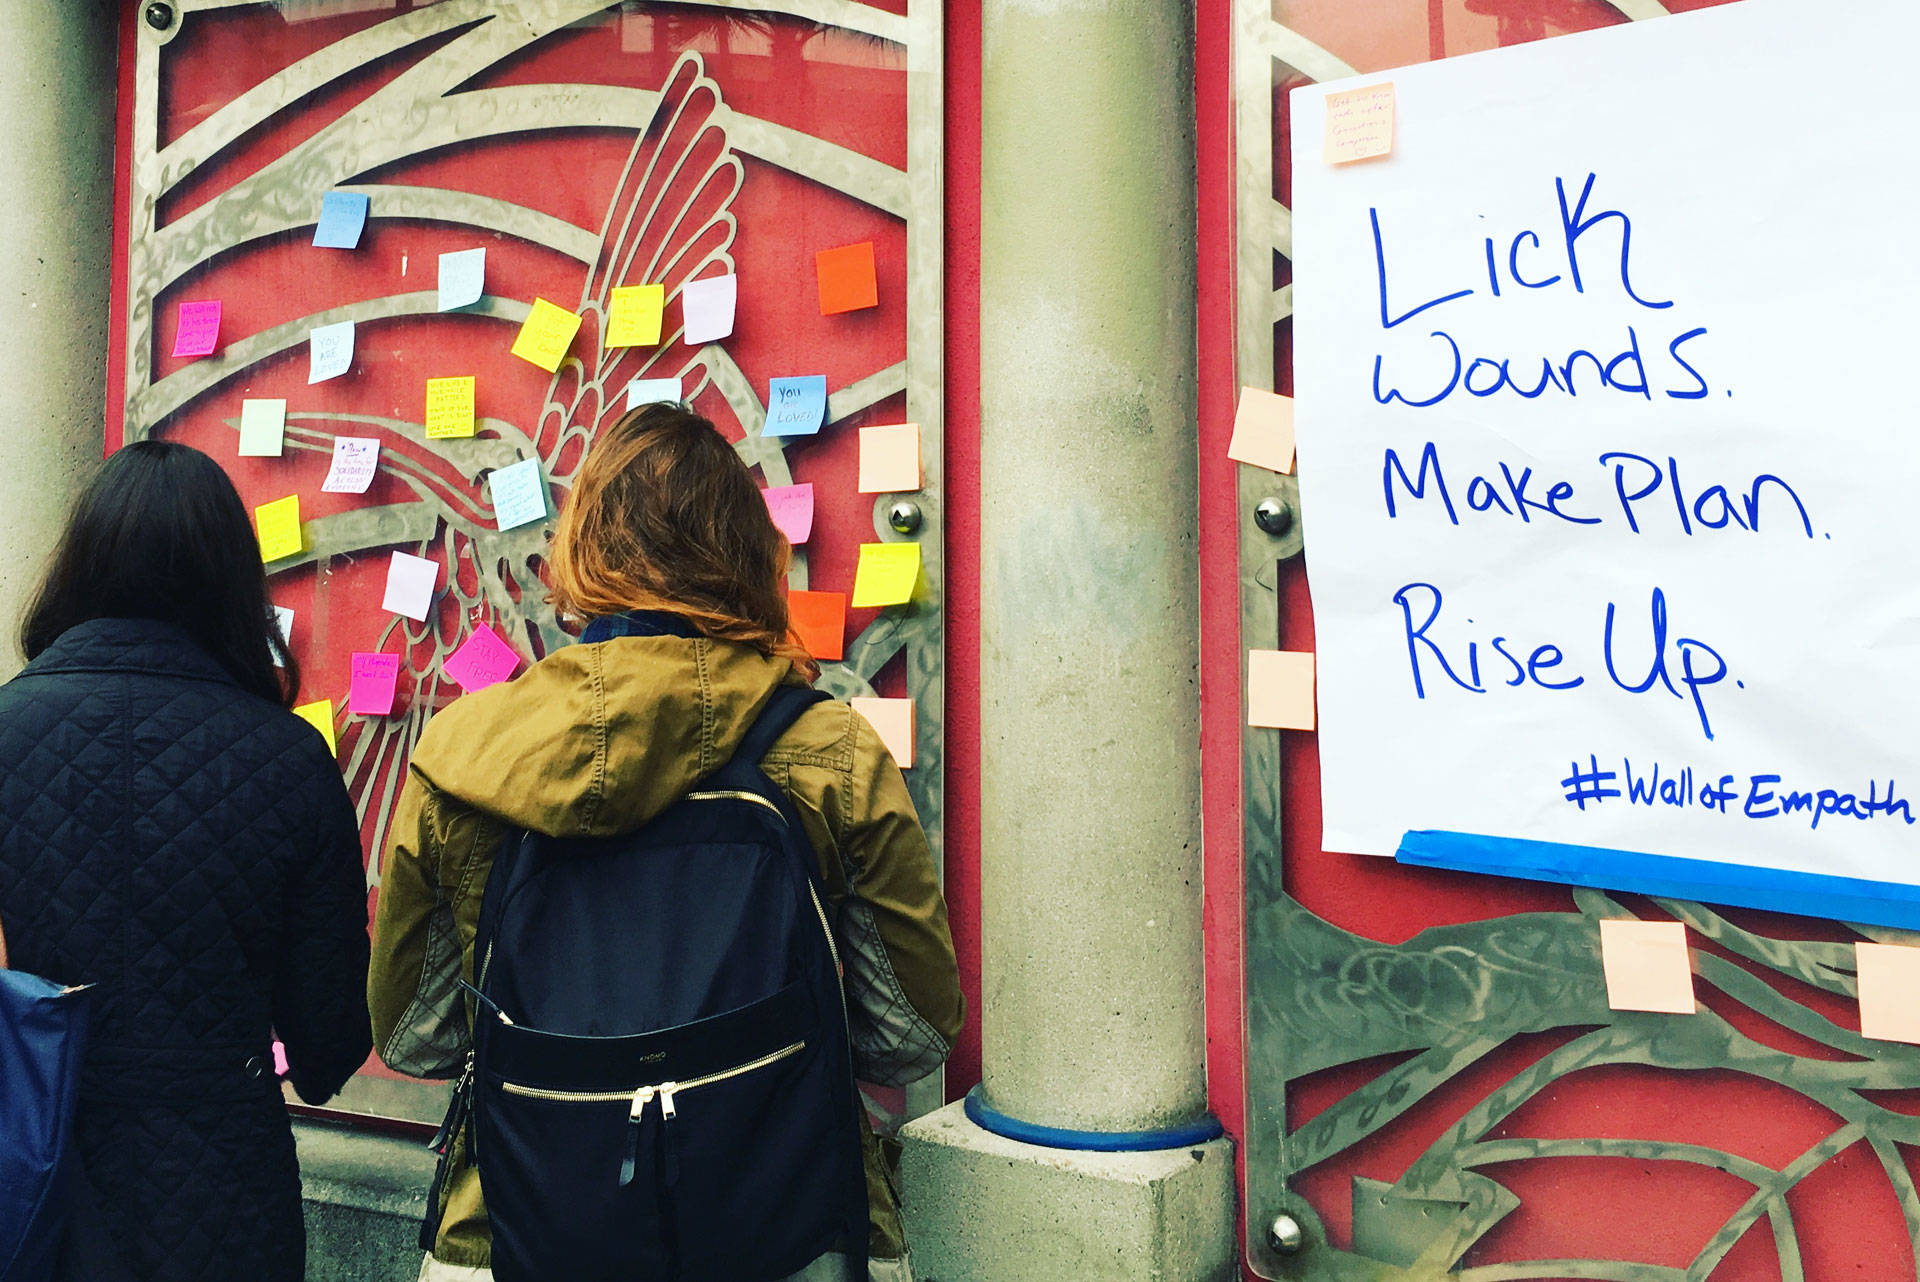 People write messages of support following Donald Trump's election victory on the walls at the 16th Street BART Station in San Francisco on Monday, Nov. 14. Rachel Roberson/KQED